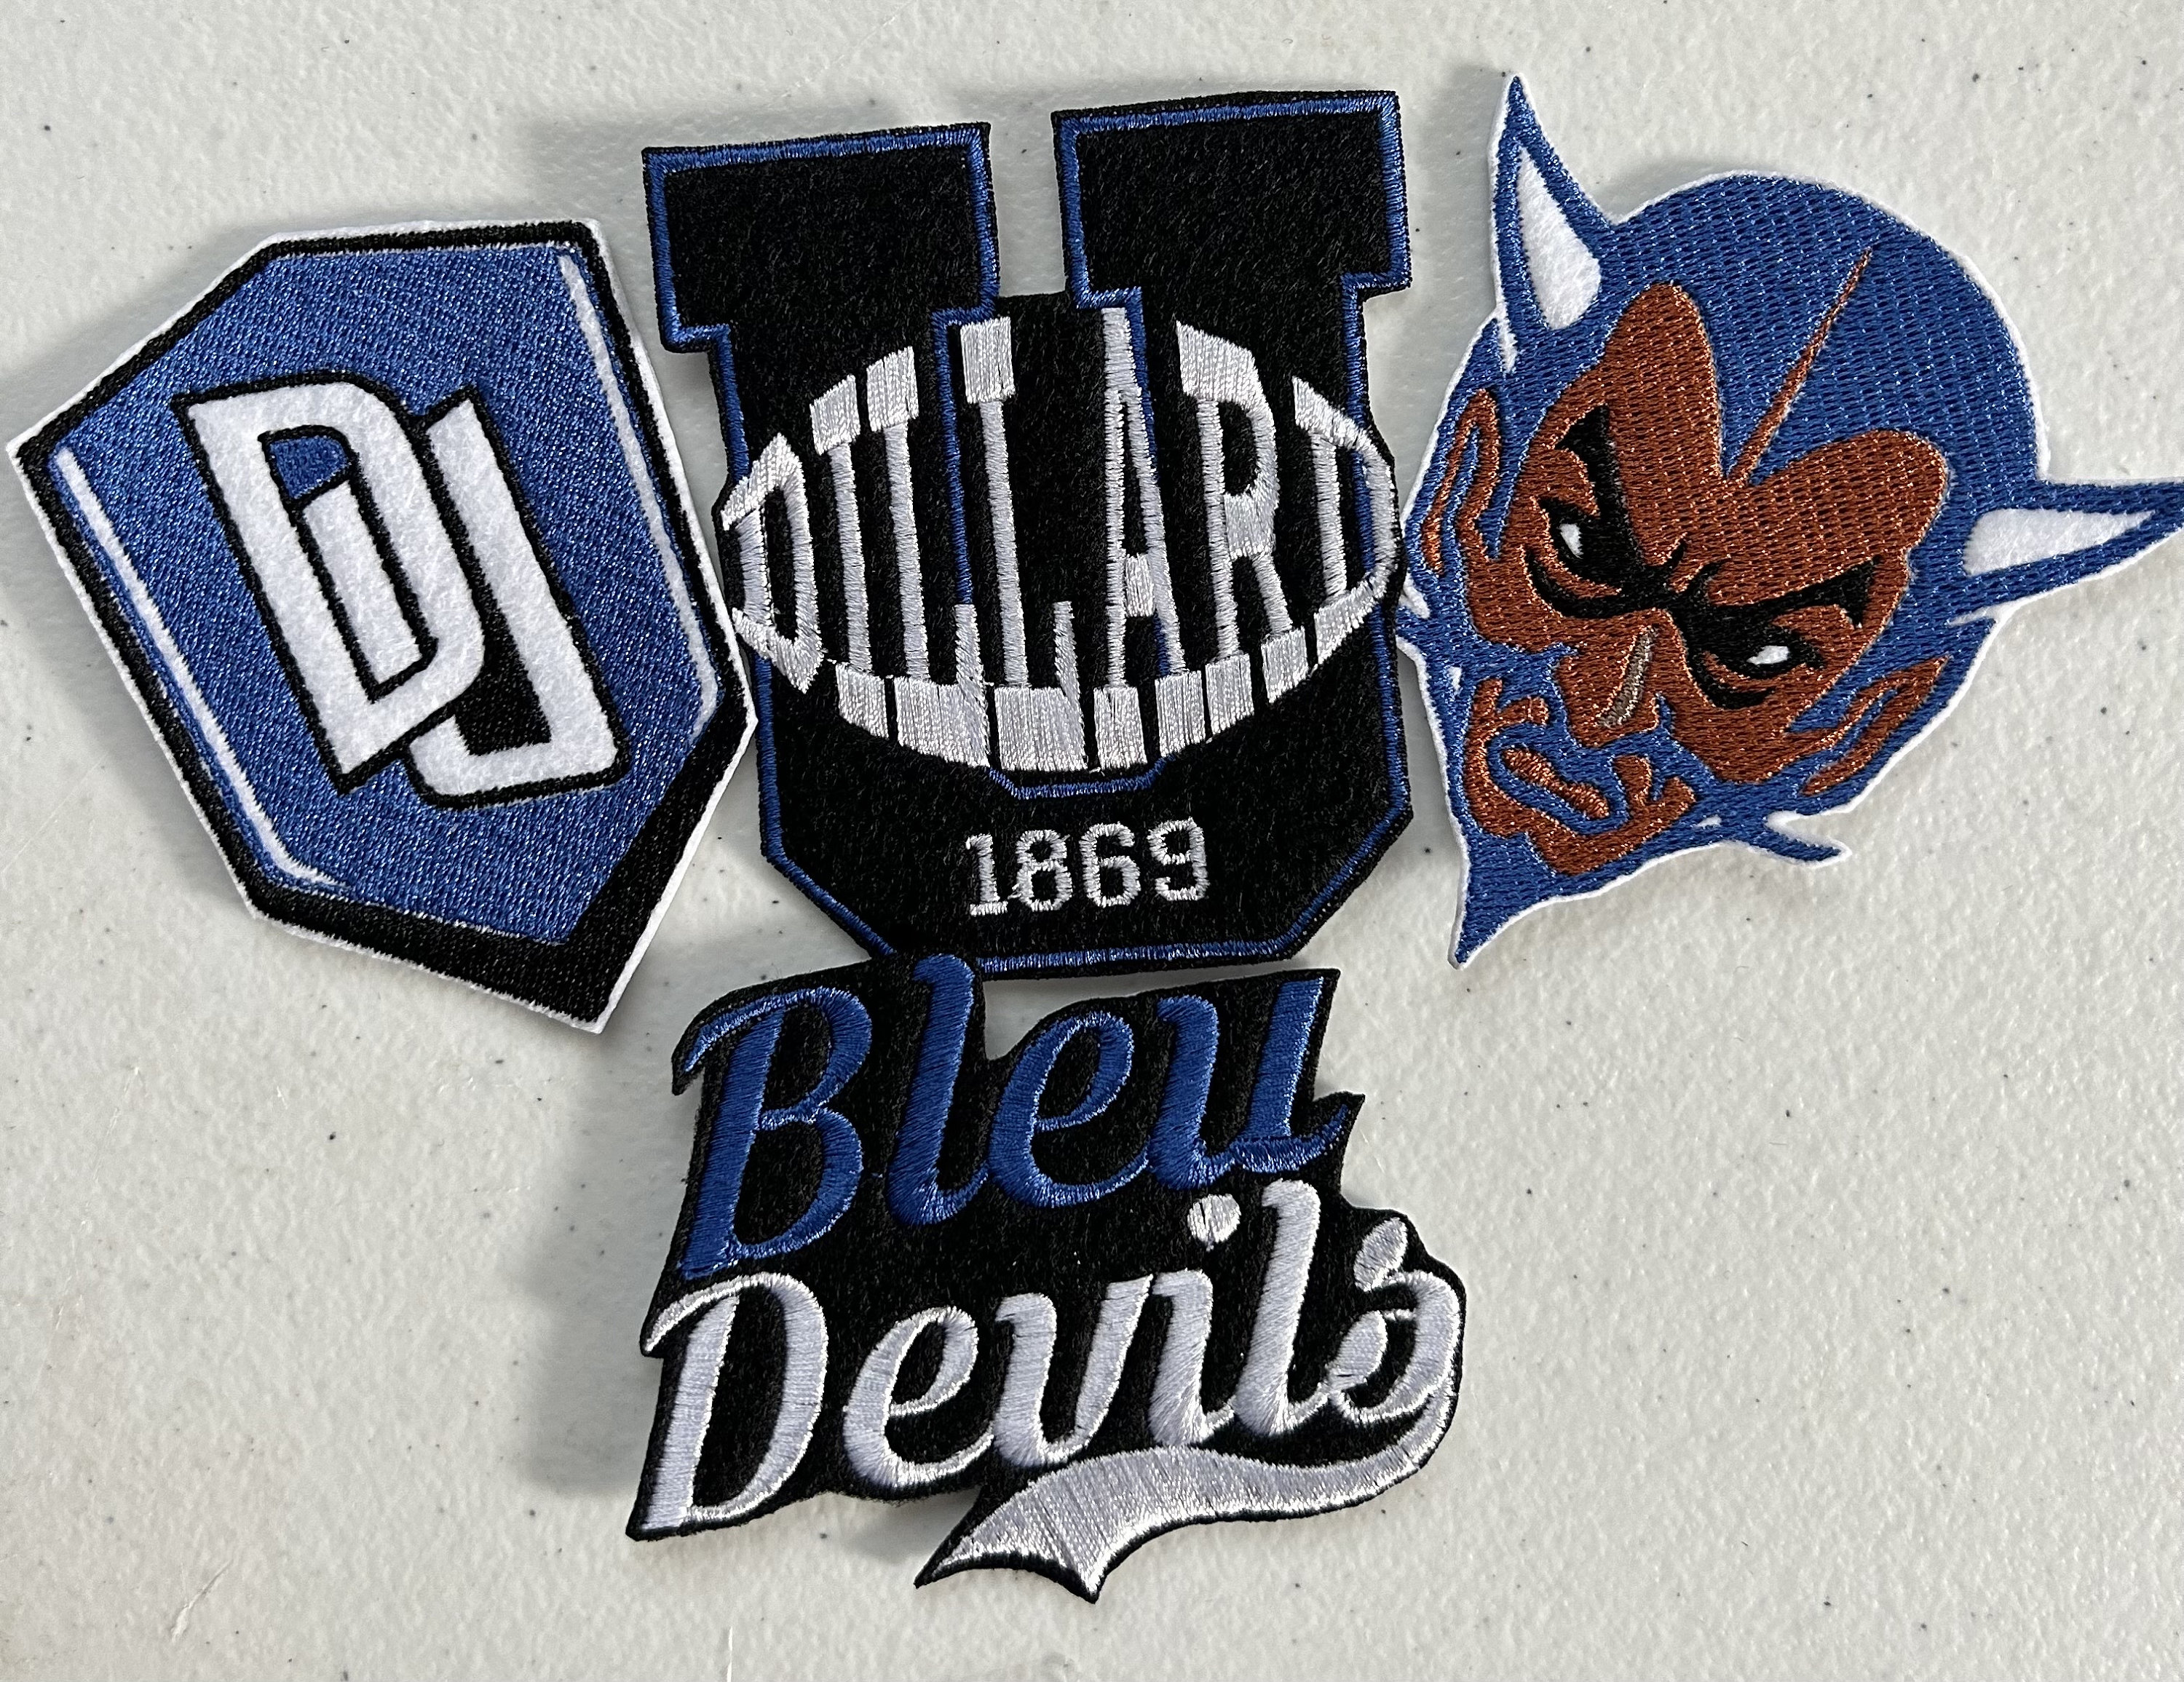 Patches for Jackets Patch Party Patch Kit Patches Iron On DTF Patches  Patches HBCU HBCU Savannah State University Jean Patches 